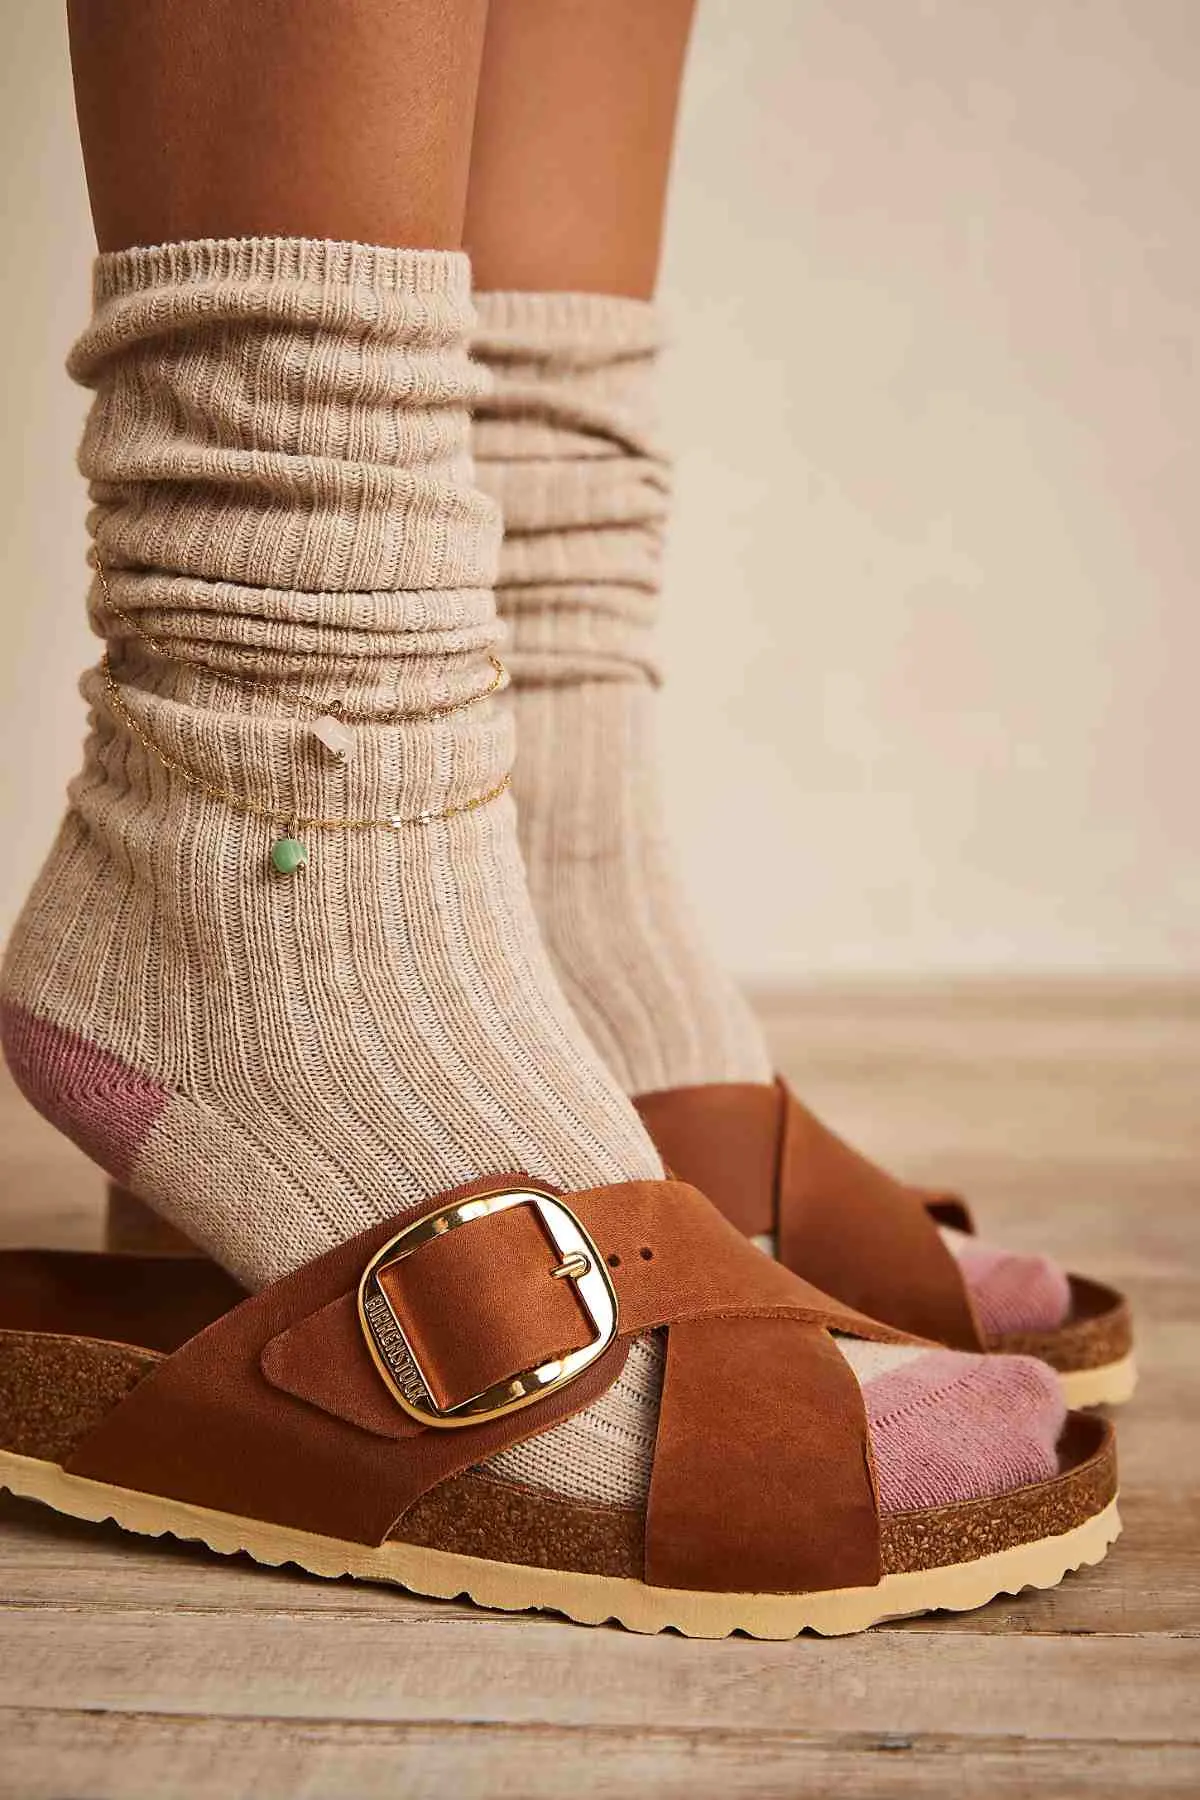 Cropped view of woman's feet wearing criss coss brown birkenstocks with socks in beige color.